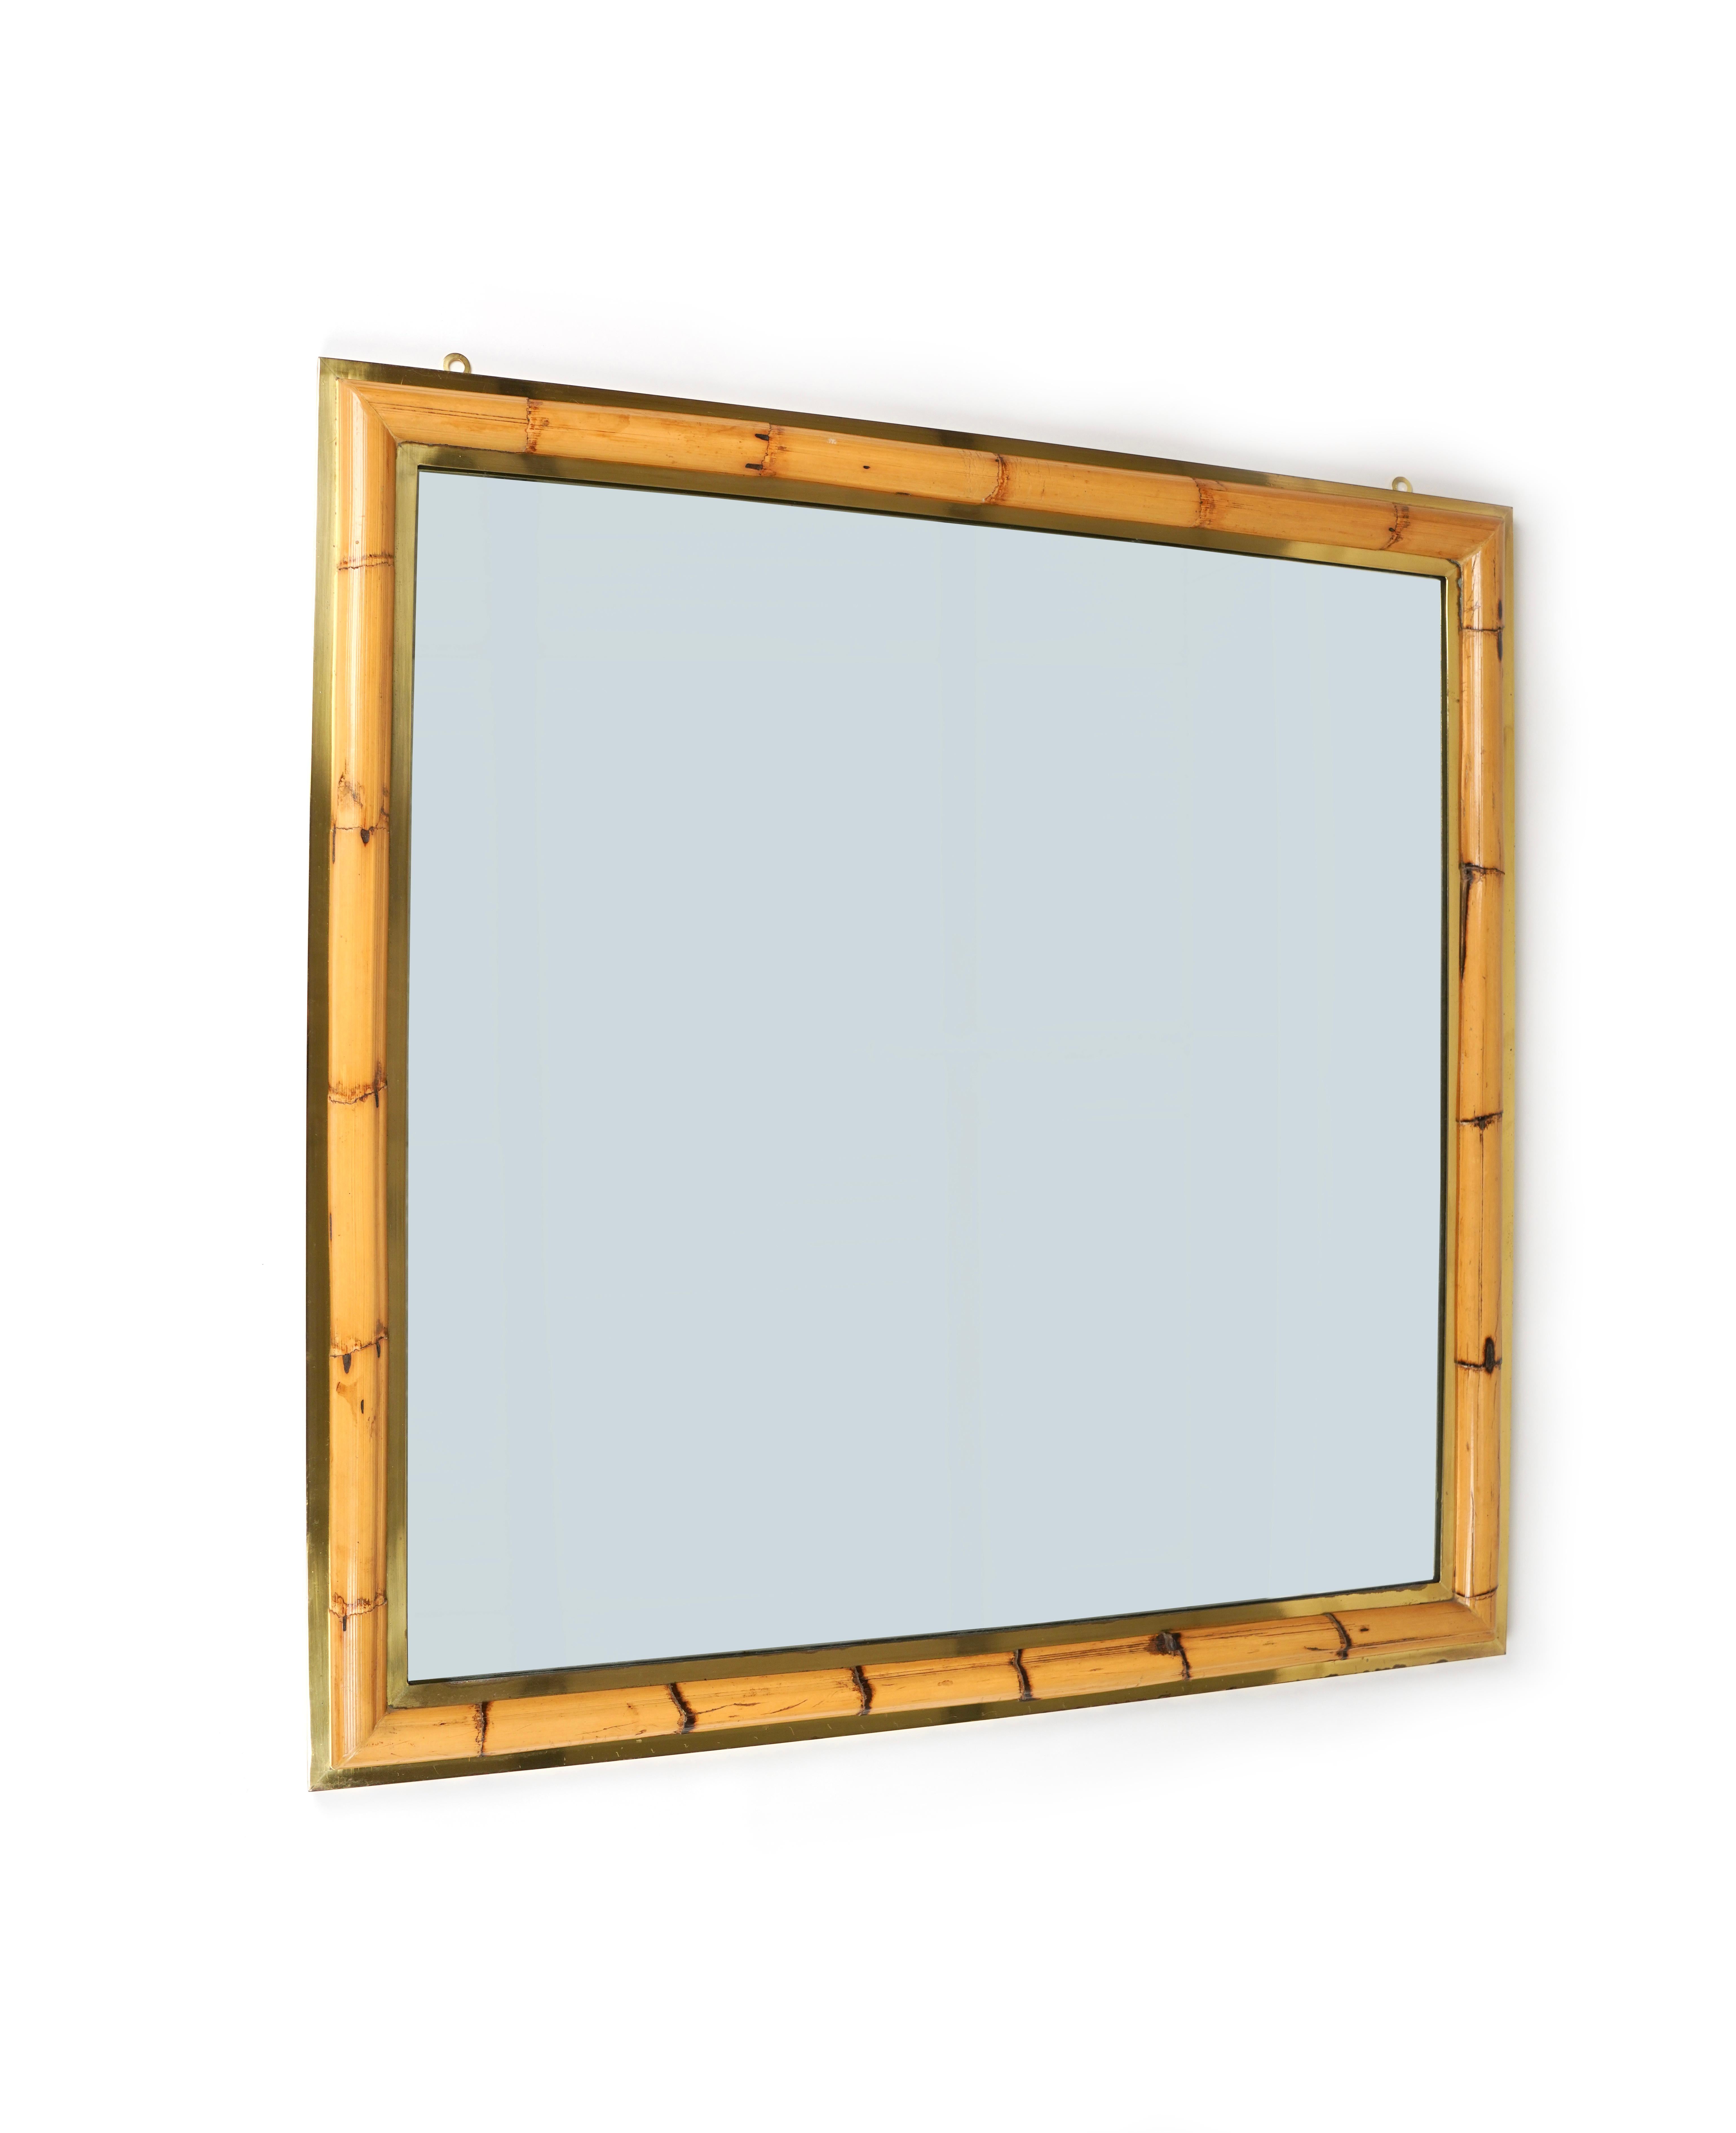 Italian Midcentury Squared Wall Mirror in Brass and Bamboo, Italy, 1970s For Sale